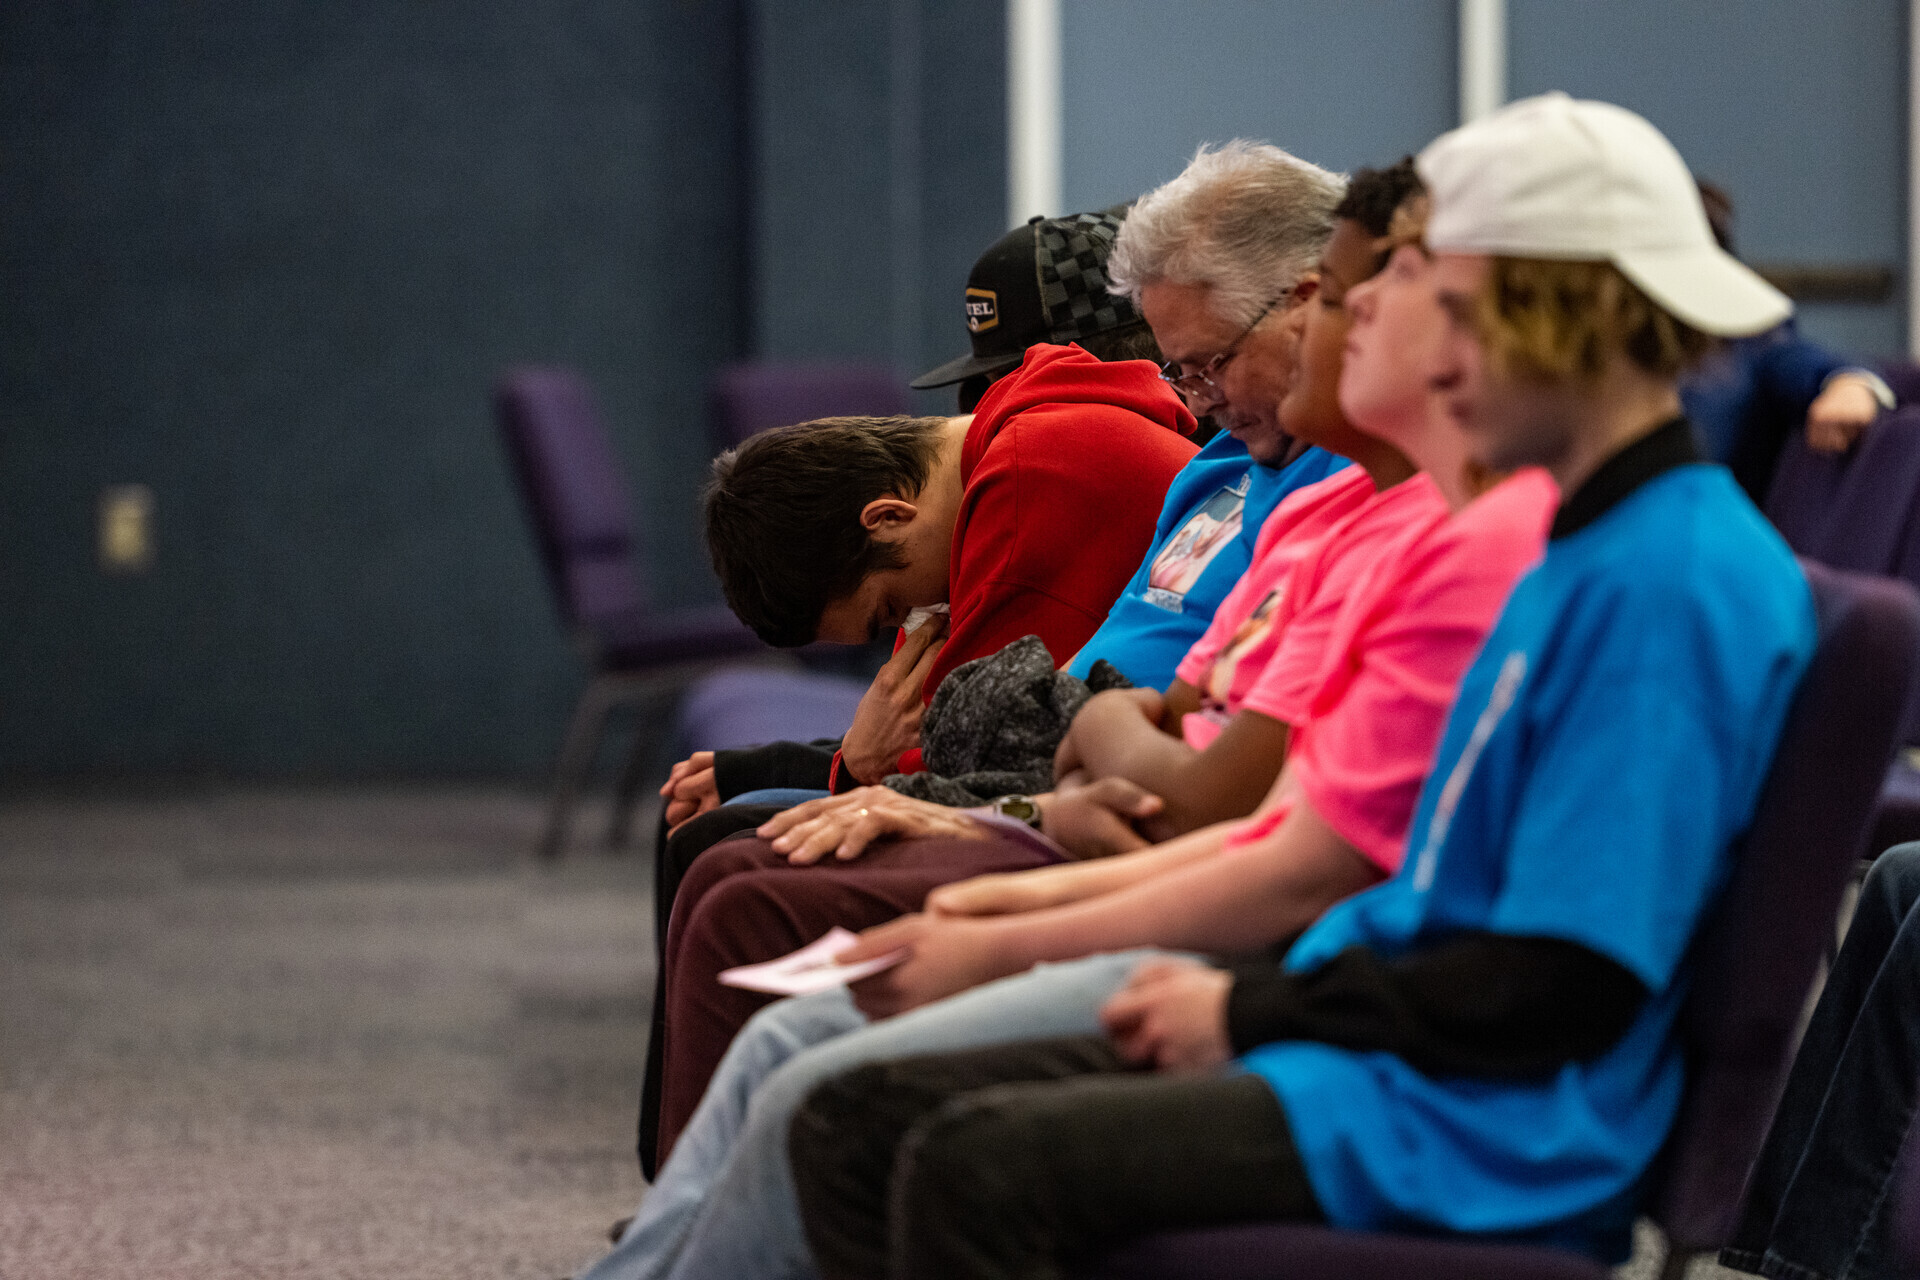 A row of mourning family members, from teens to older males, sit inside a church. One bows their head with a sad expression as they listen to speakers during a funeral service for their loved ones who've died.